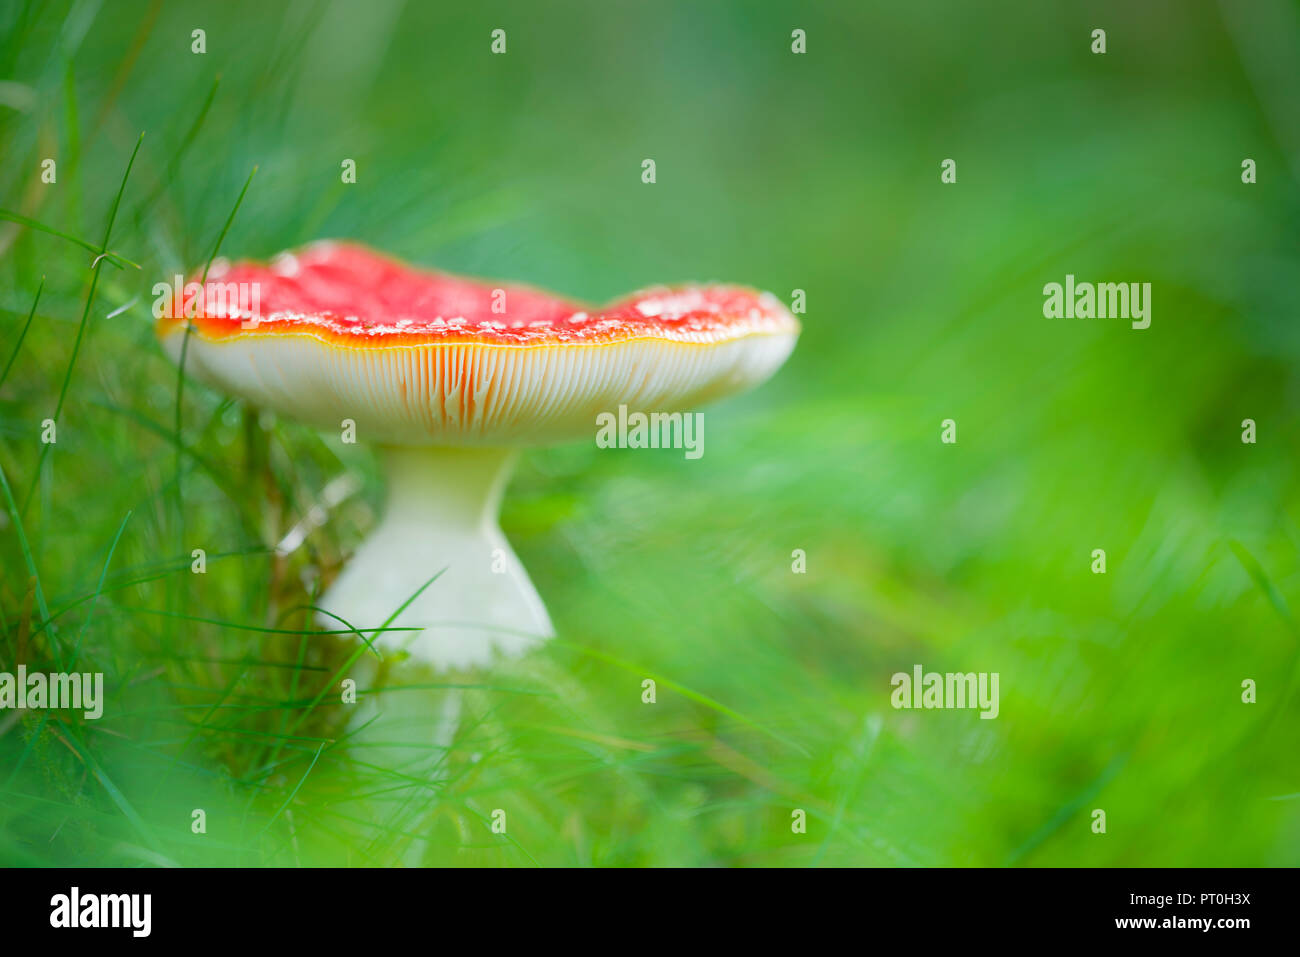 Fly Agaric (Amanita muscaria) mushroom growing in grass in Stockhill Wood, Somerset, England. Stock Photo